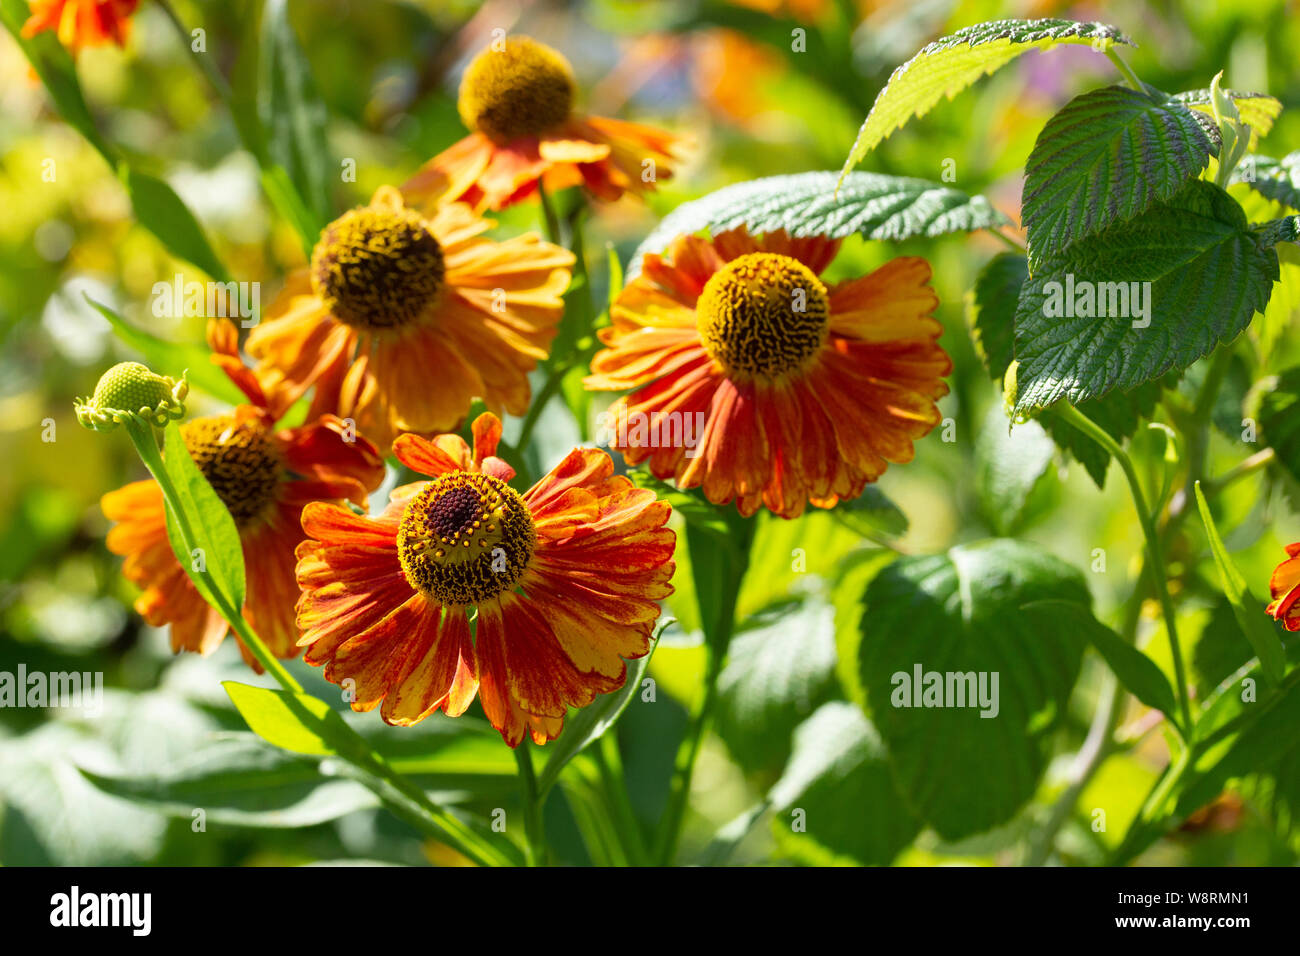 Helenium is blooming with orange flowers on a background of green foliage. Beautiful flowers with bright carved petals and large dark middle stamens Stock Photo